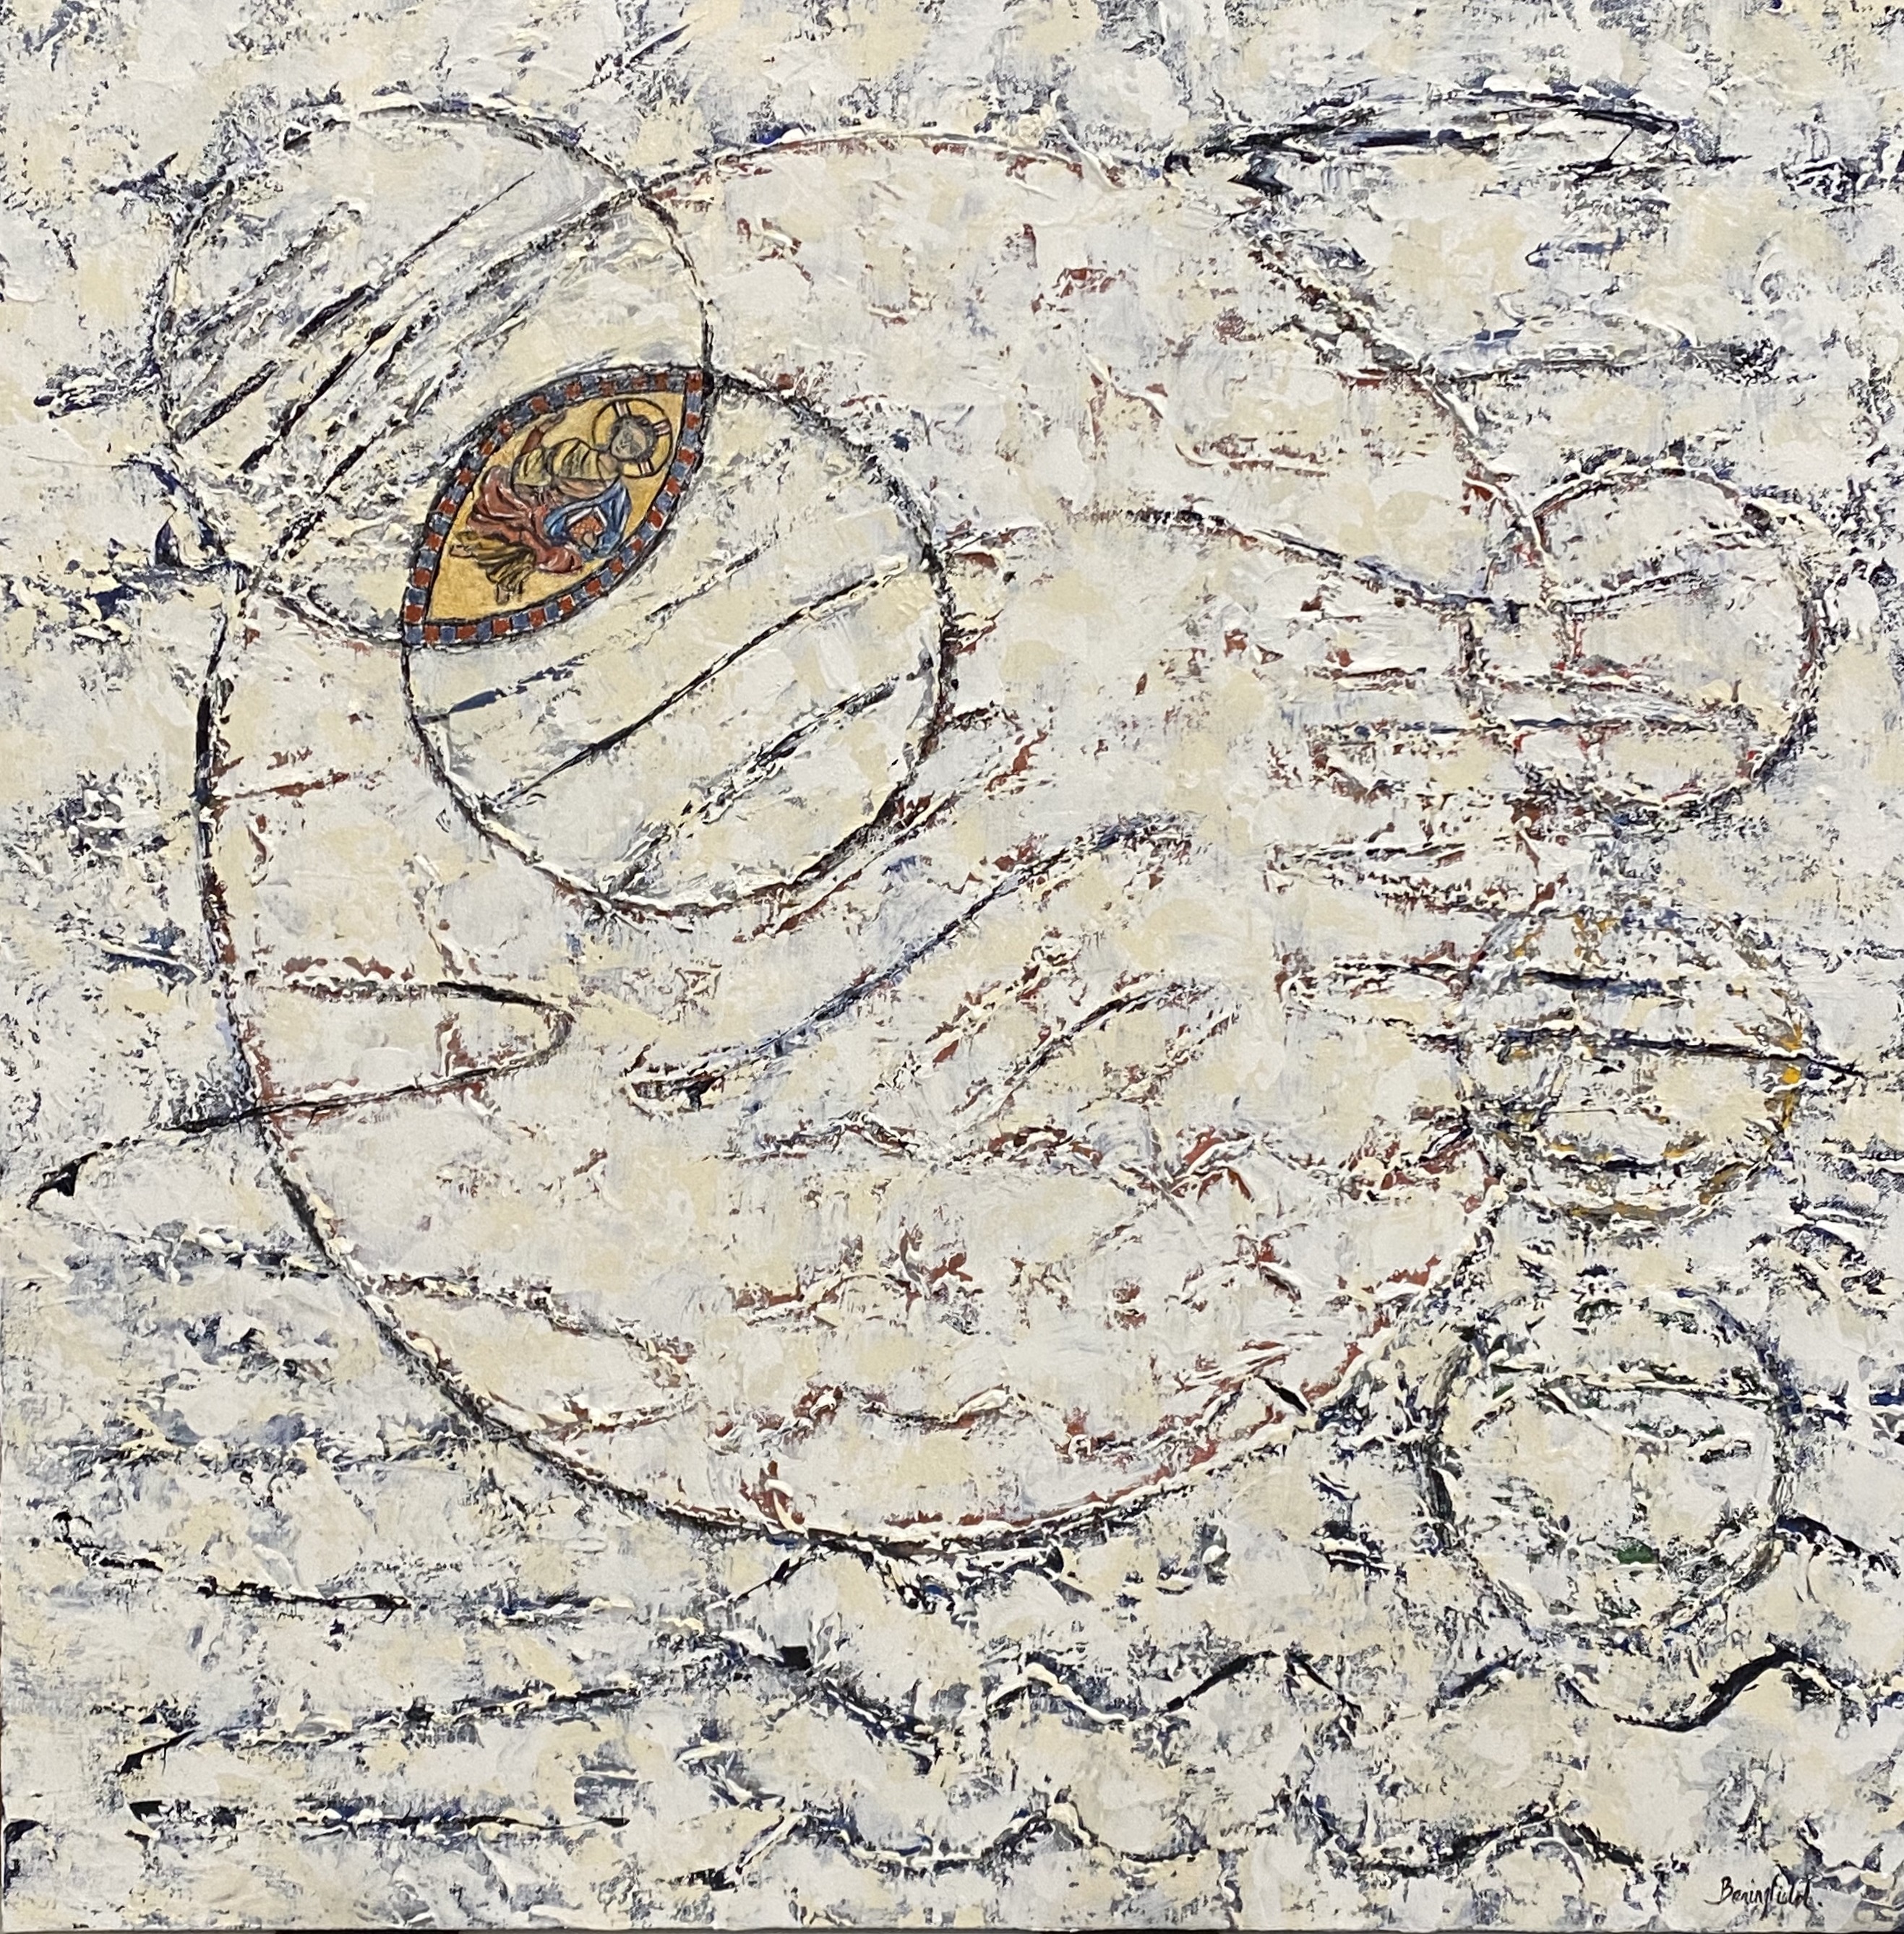 Margaret Trevethan Eternal Hope Acrylic and Charcoal on Canvas 90cm x 90cm 2020